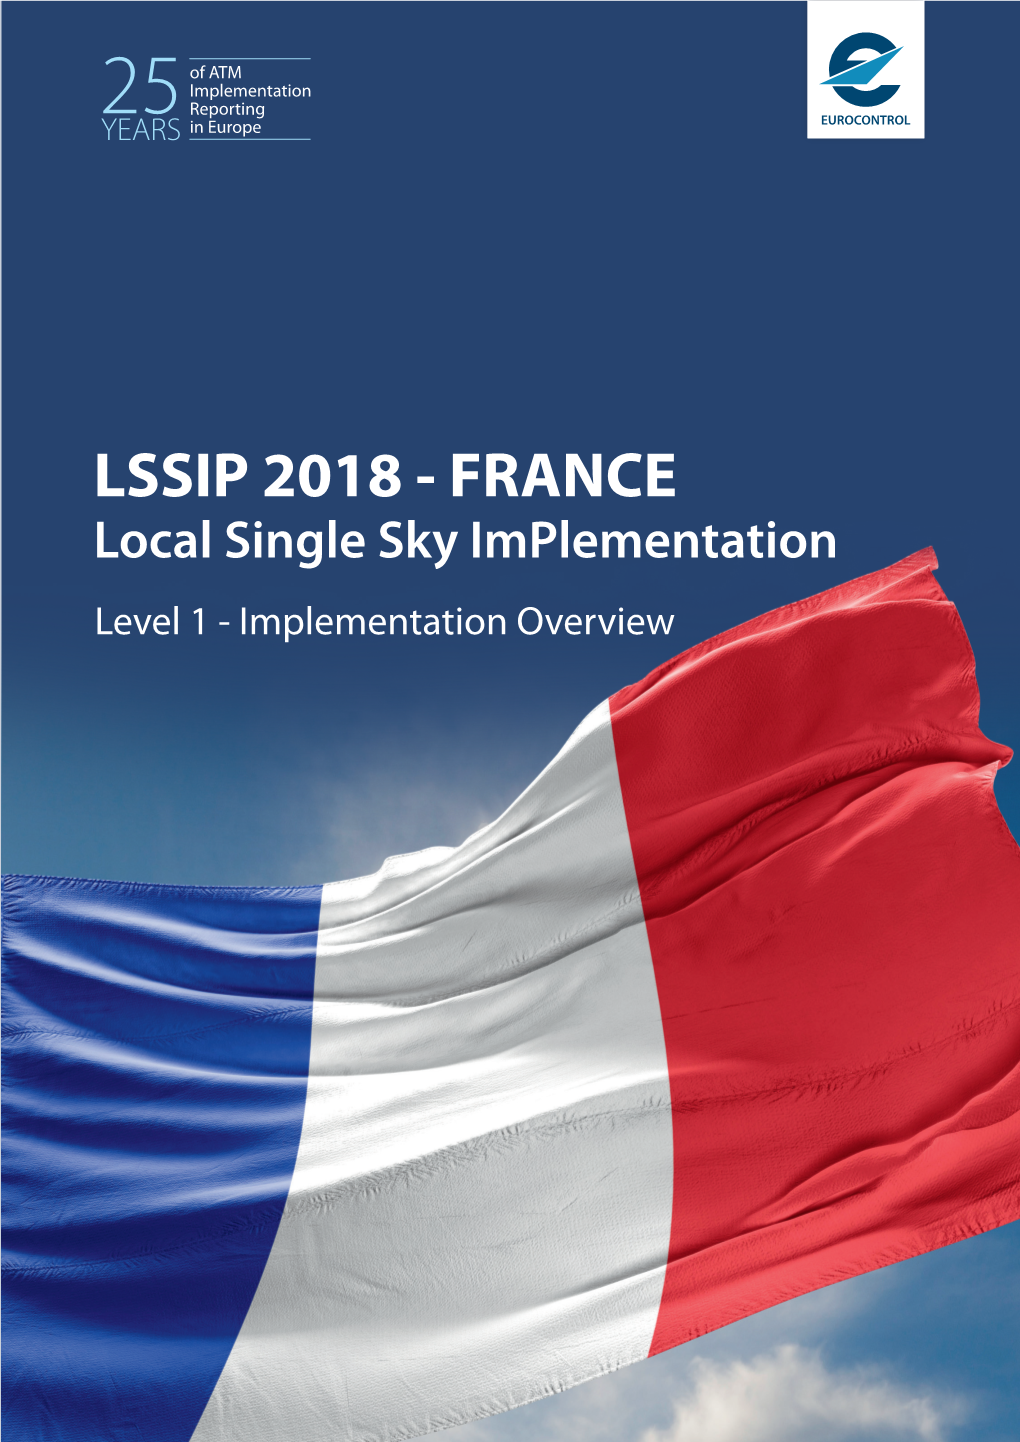 FRANCE Local Single Sky Implementation Level 1 - Implementation Overview